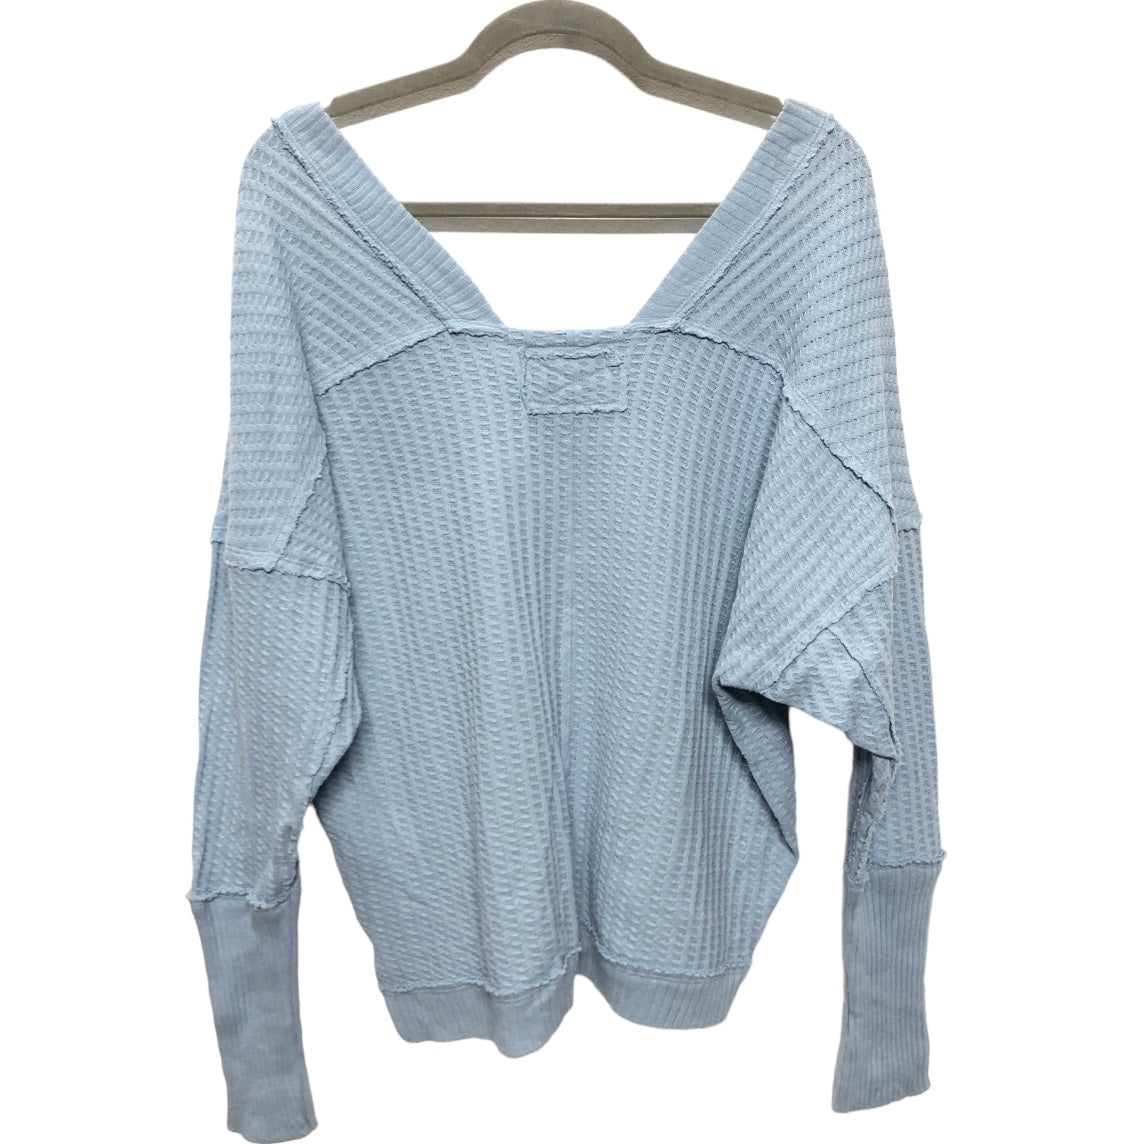 Blue Top Long Sleeve Free People, Size M